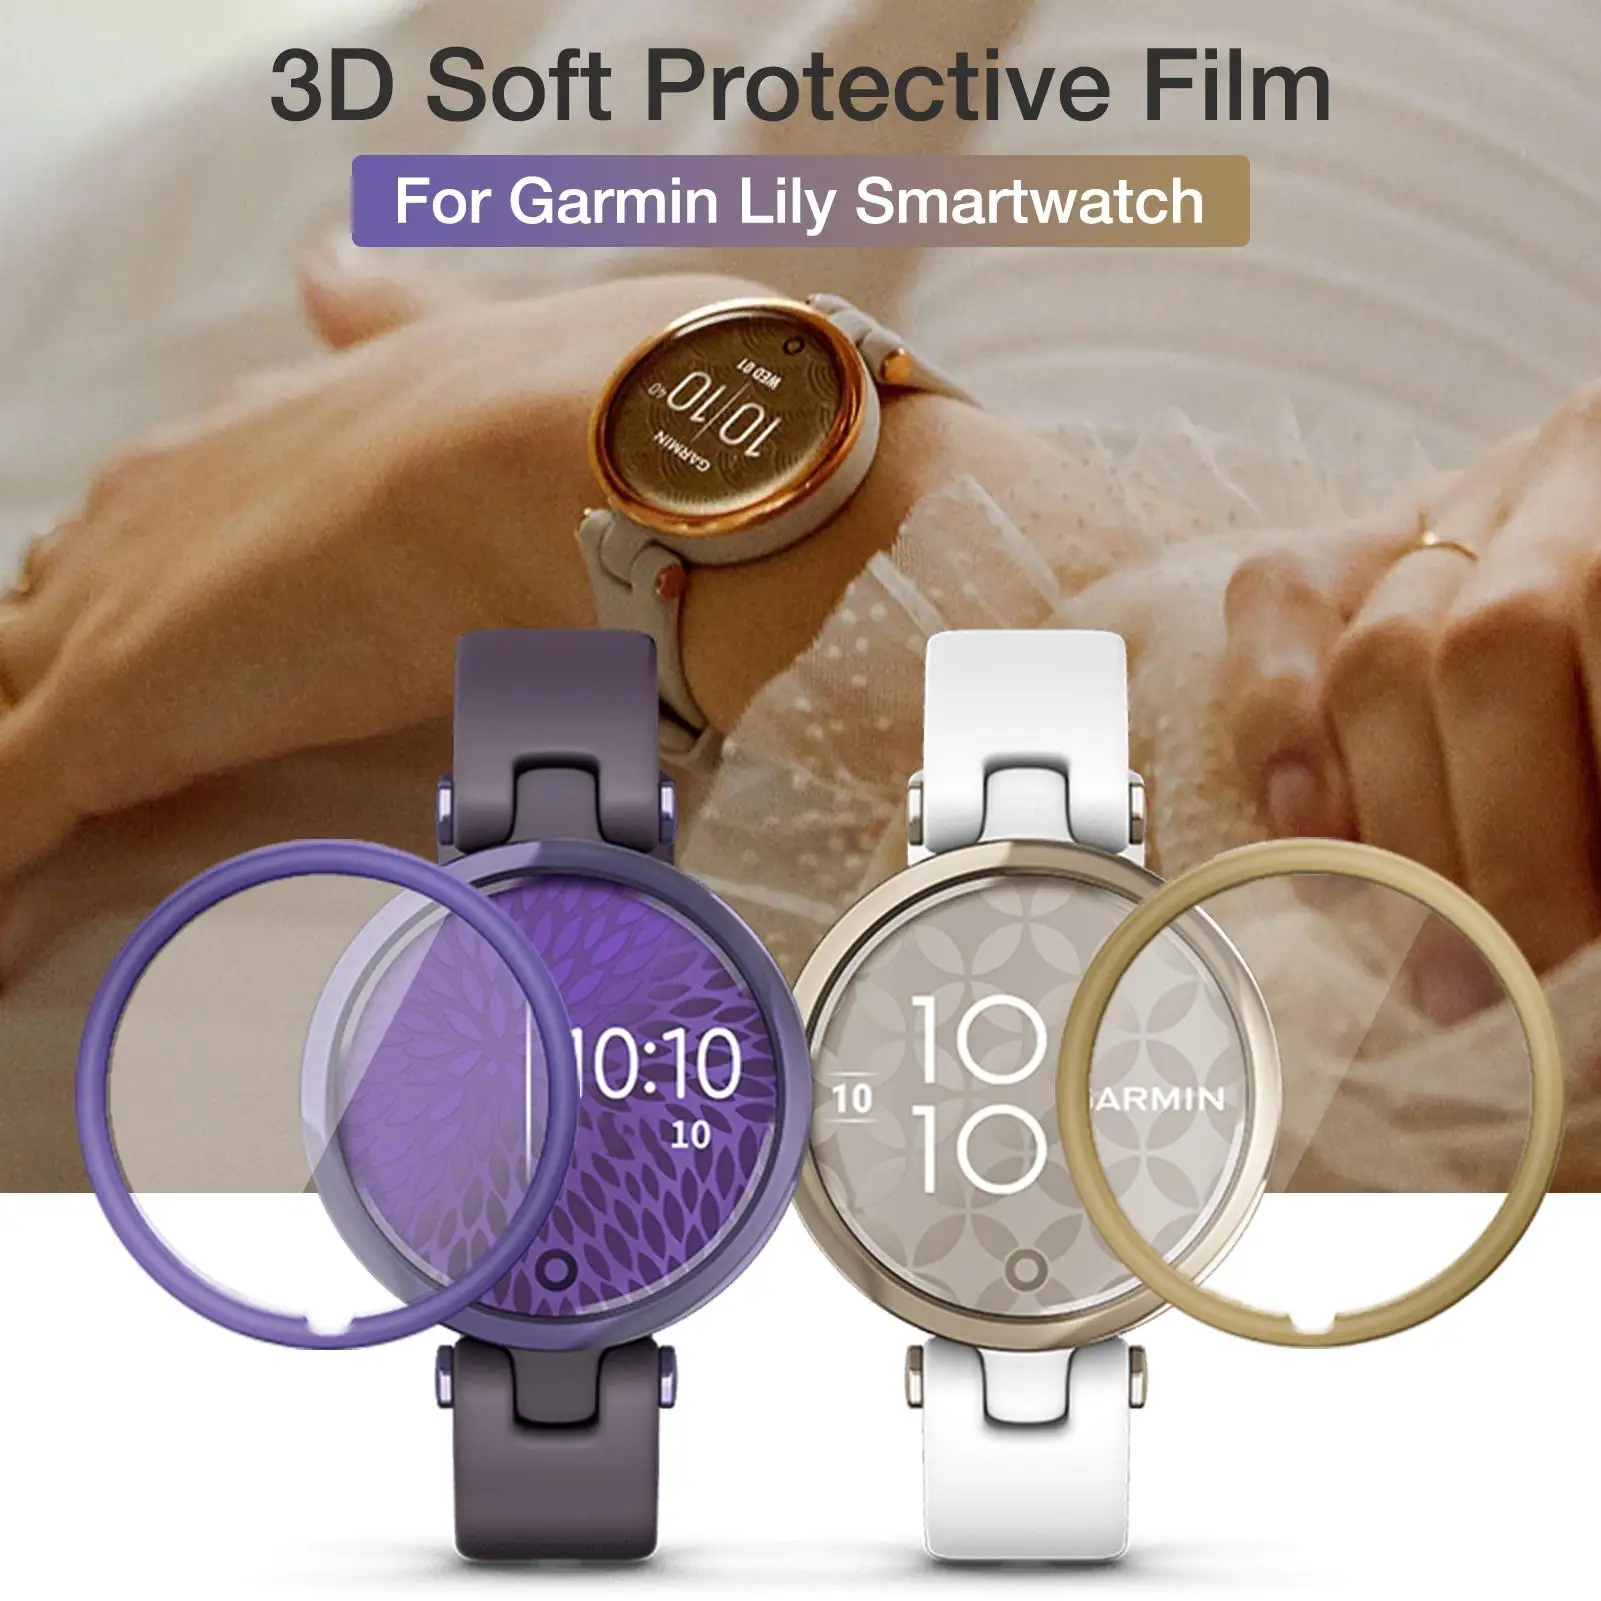 5Pcs 3D Curved Protective Film For Garmin Lily Smartwatch Wristband Band Strap Full Coverage Screen Protector Film Accessories